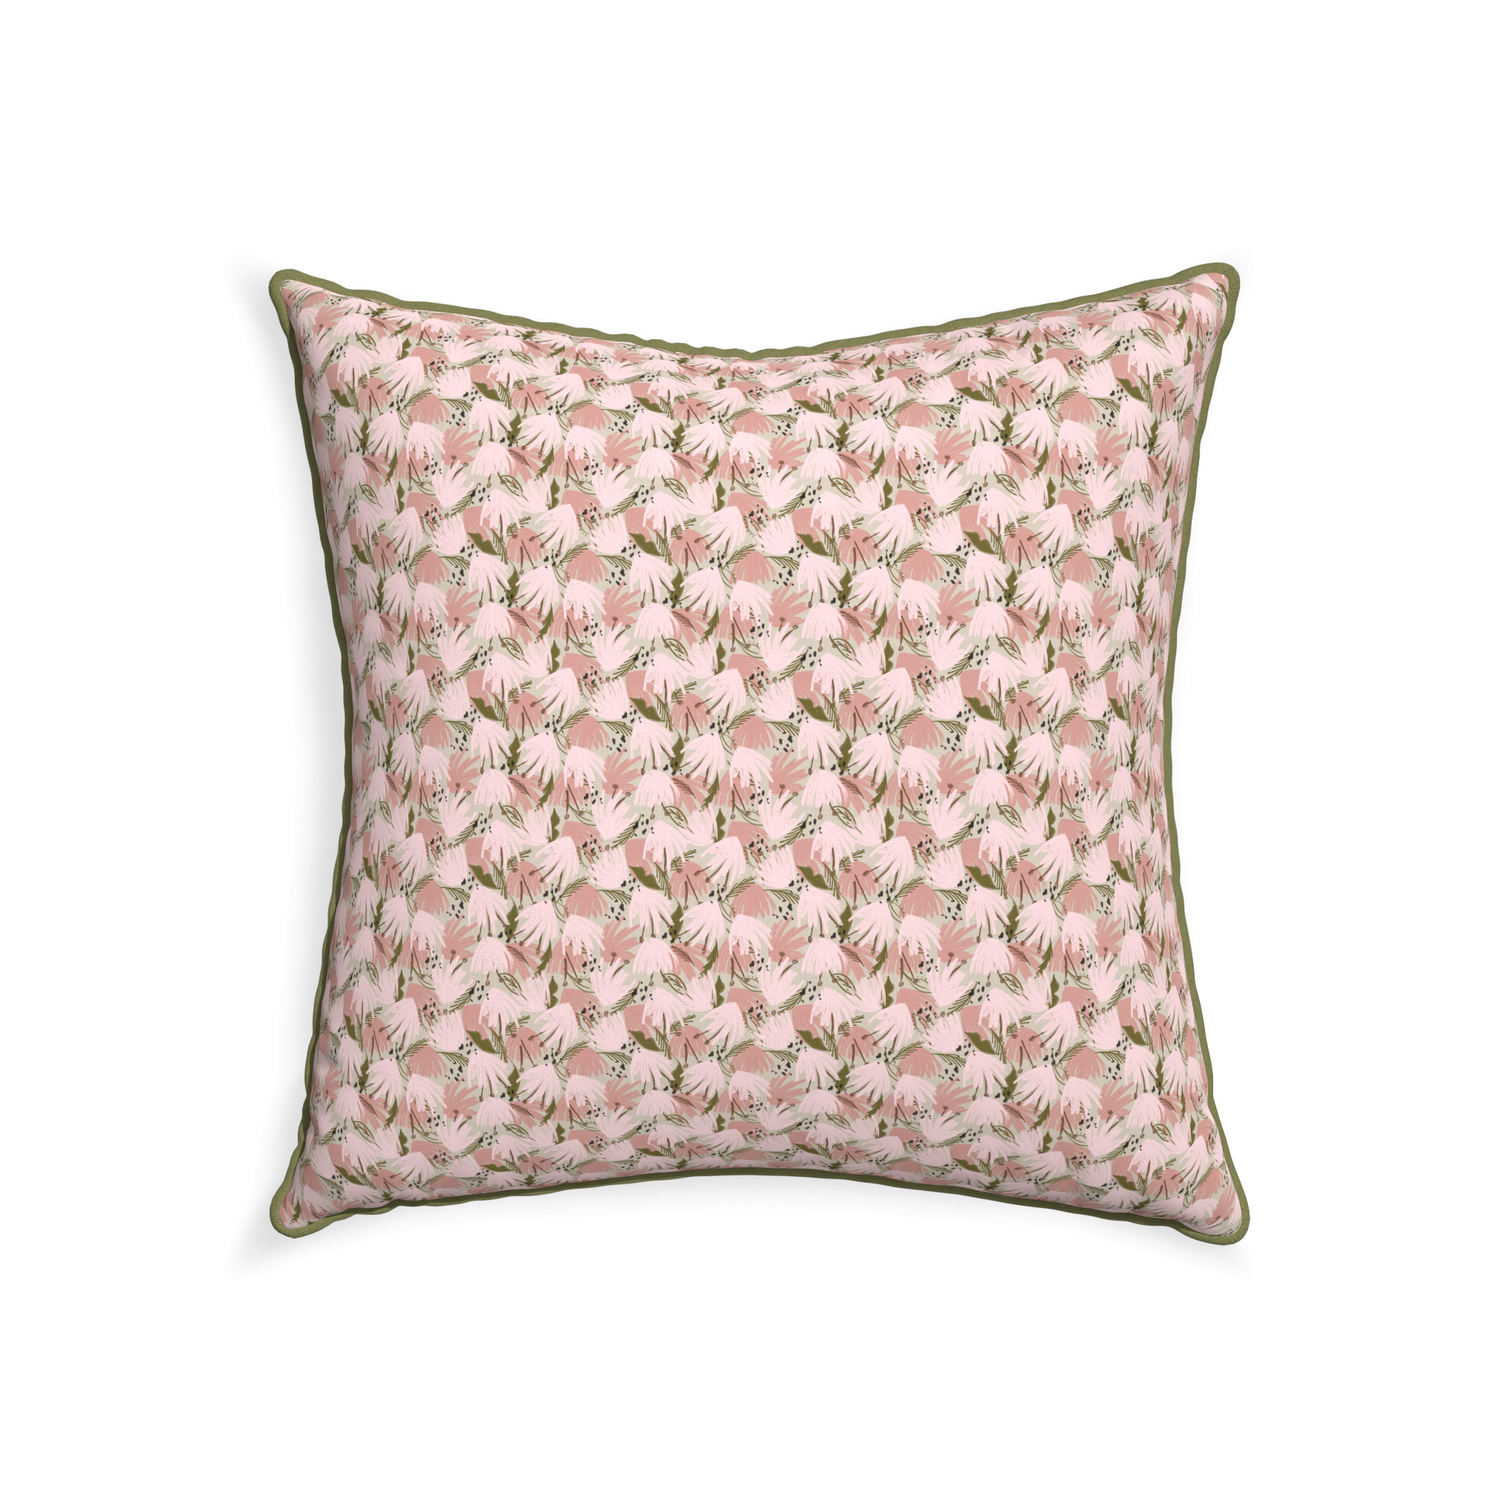 22-square eden pink custom pink floralpillow with moss piping on white background